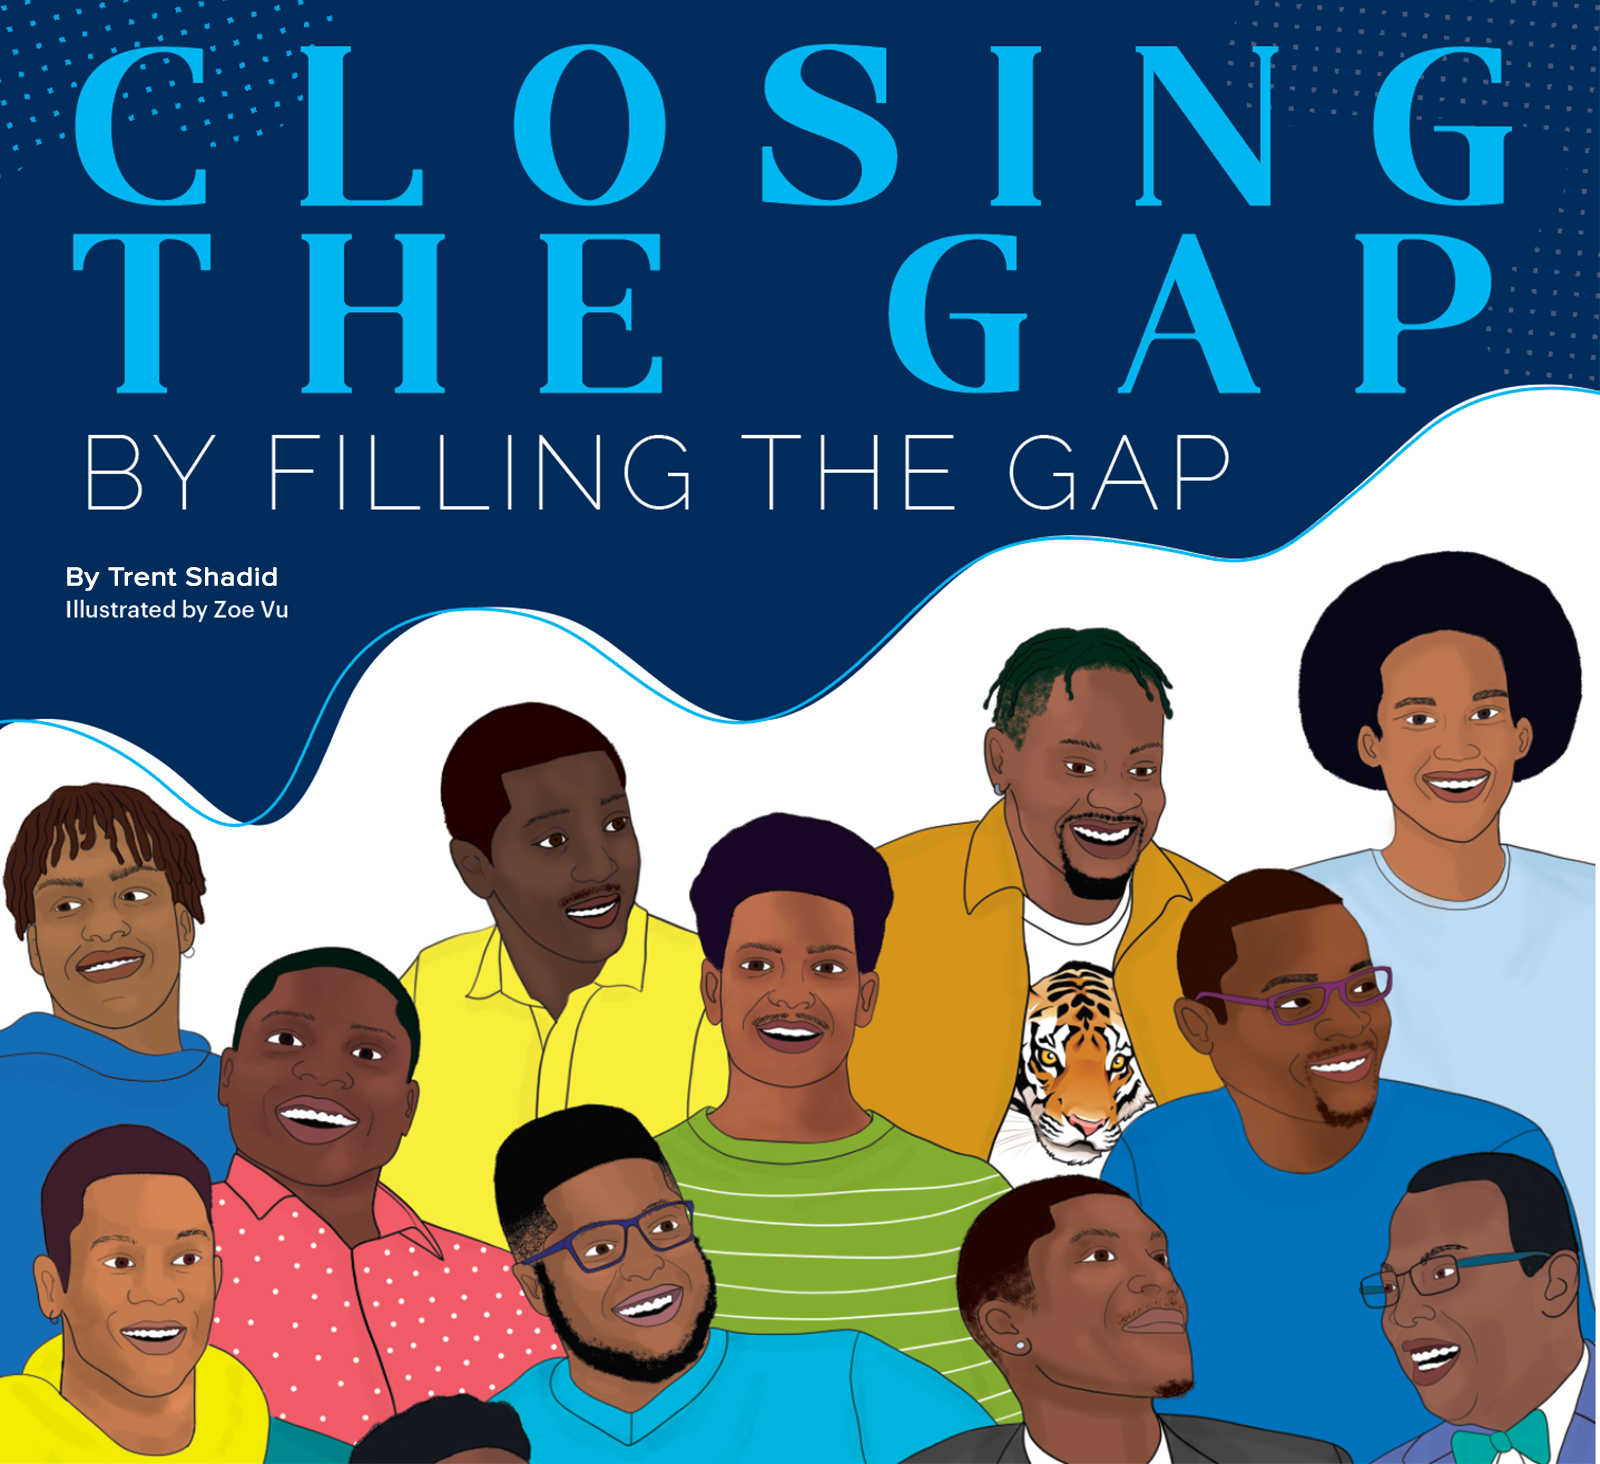 Closing the Gap by Filling the Gap | by Trent Shadid | Illustrations by Zoe Vu